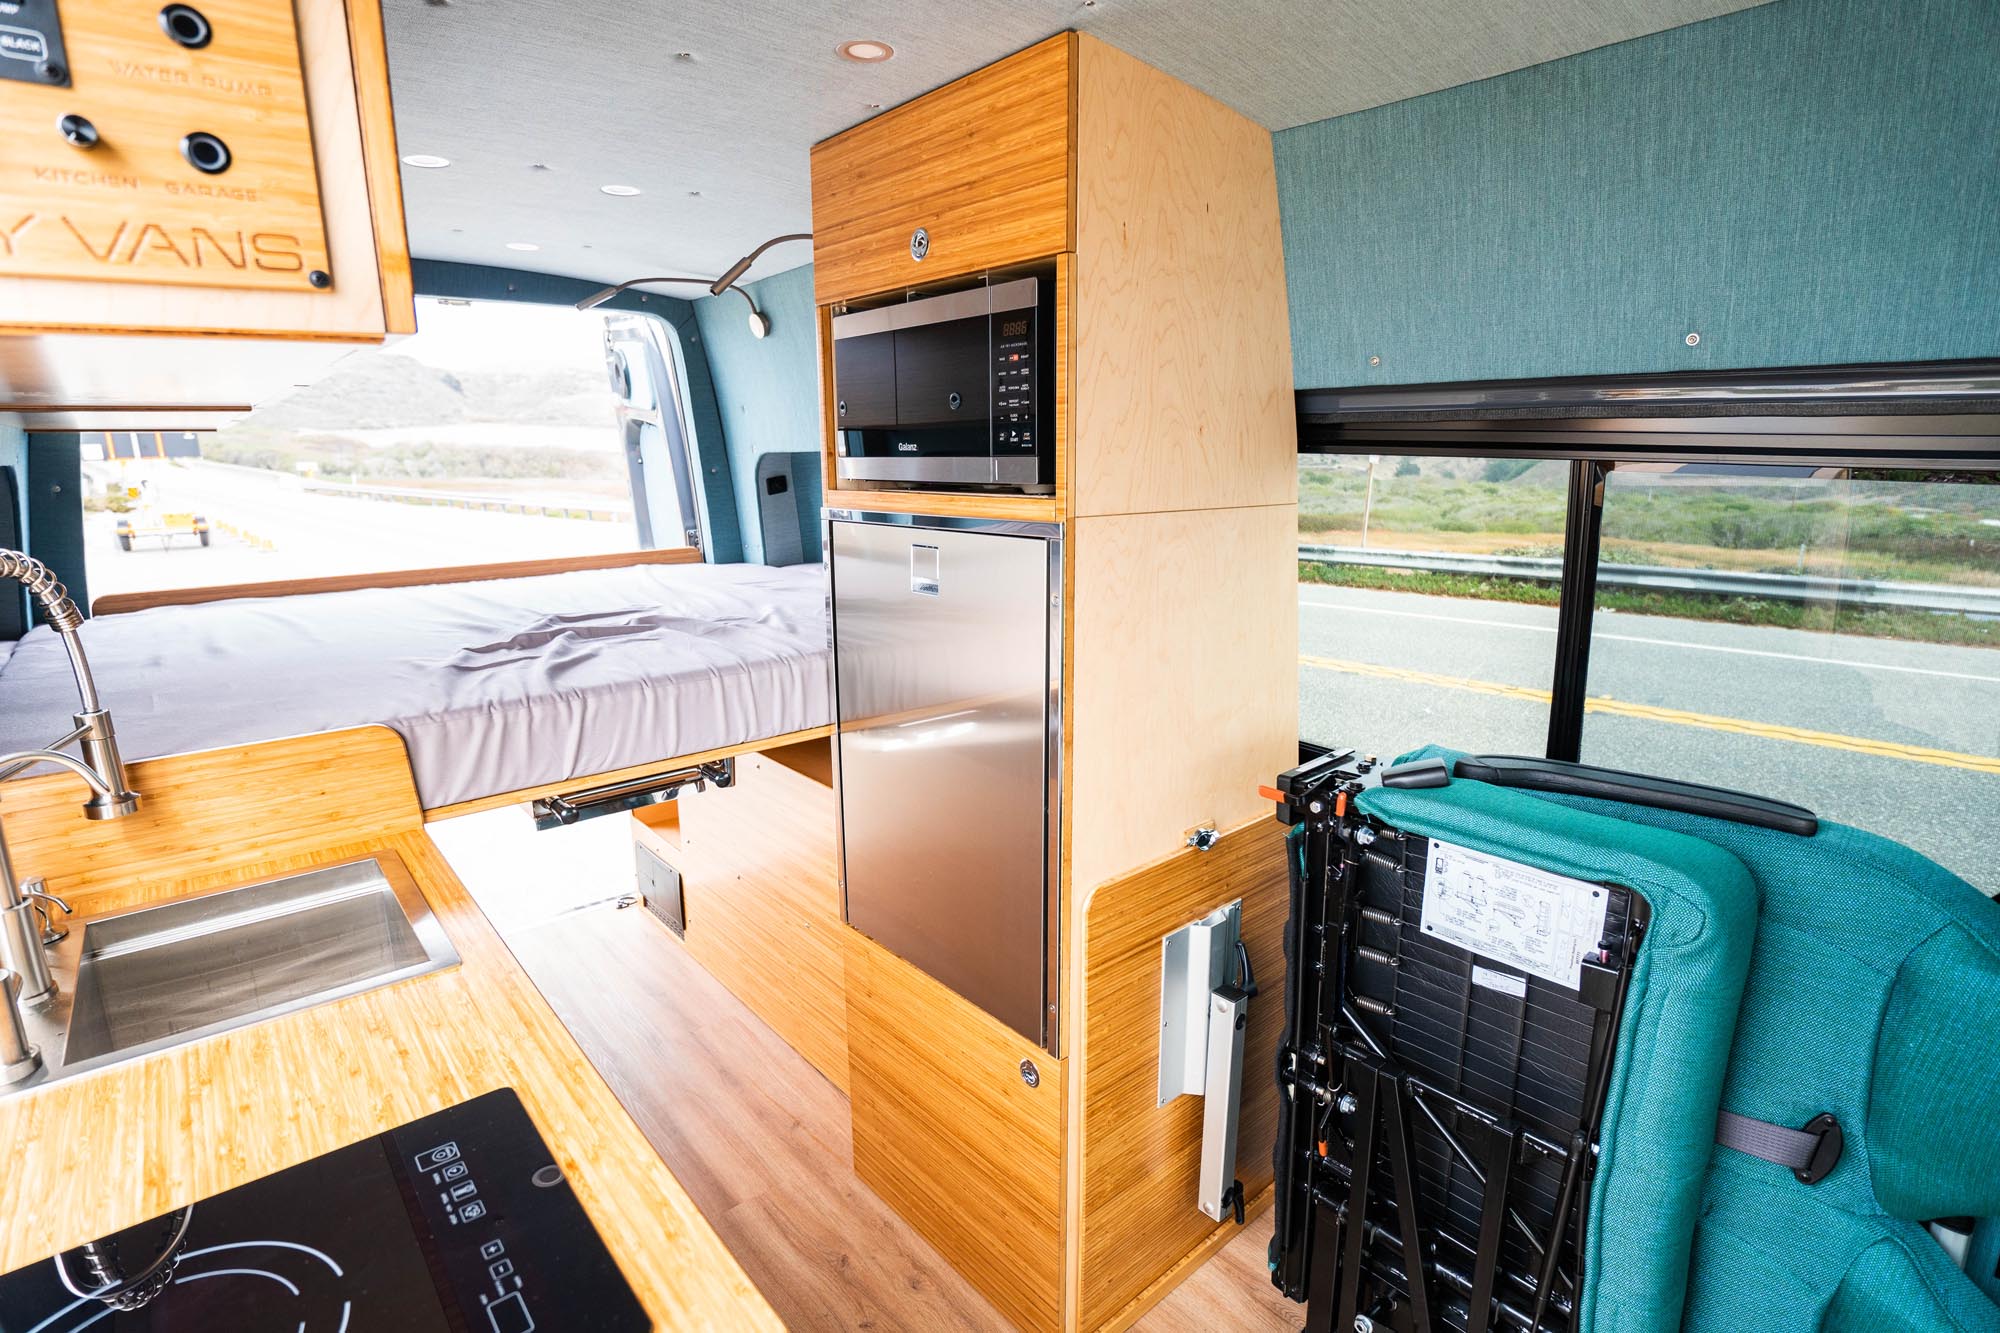 luxury van conversion with bamboo cabinetry, platform bed folding bench seat induction cooktop